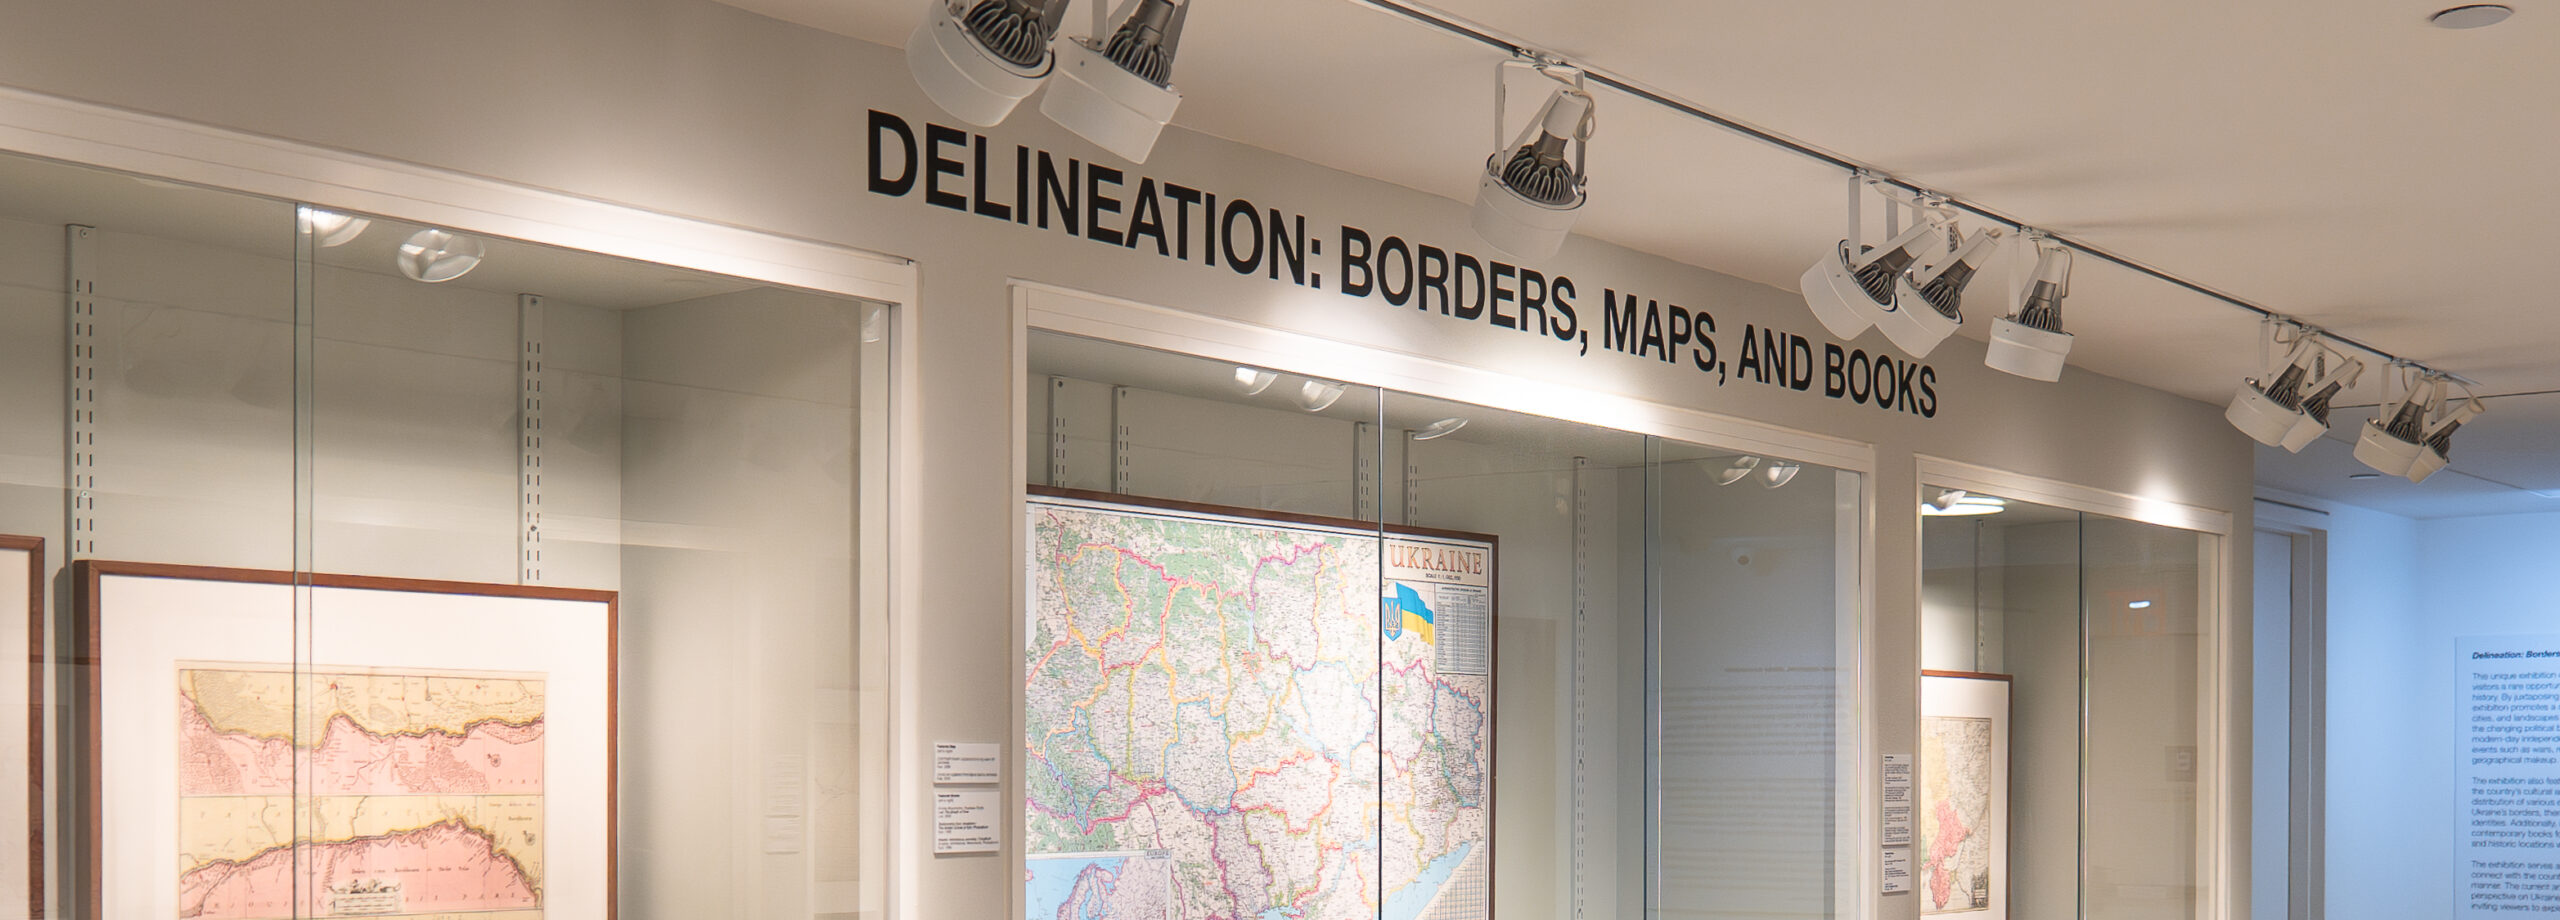 DELINEATION: BORDERS, MAPS, AND BOOKS